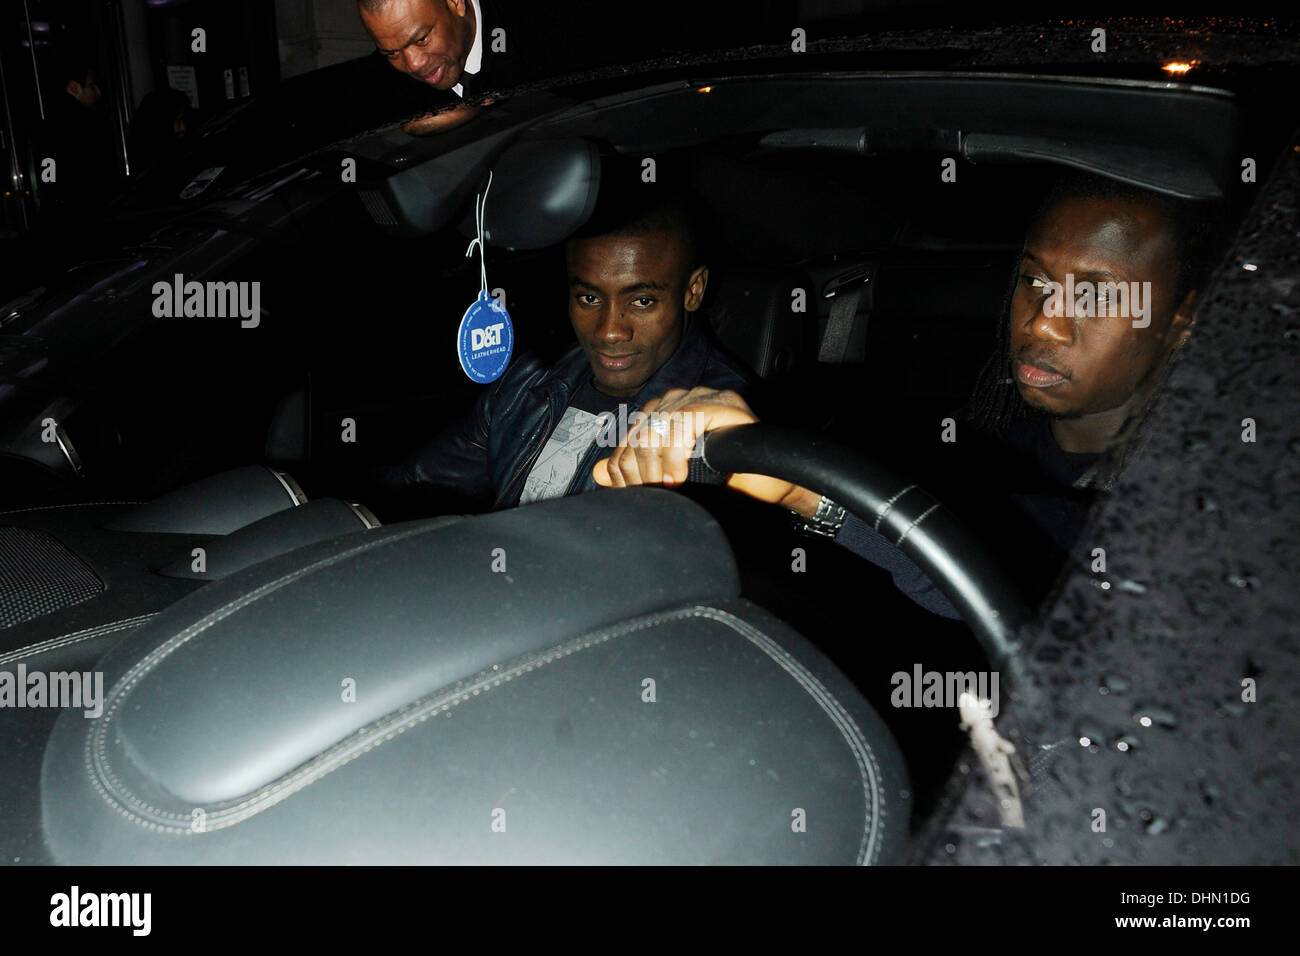 Chelsea FC player Salomon Kalou leaves (L) Novikov Restaurant and Bar after  celebrating his teams FA Cup Final win over Liverpool FC London, England -  05.05.12 Stock Photo - Alamy